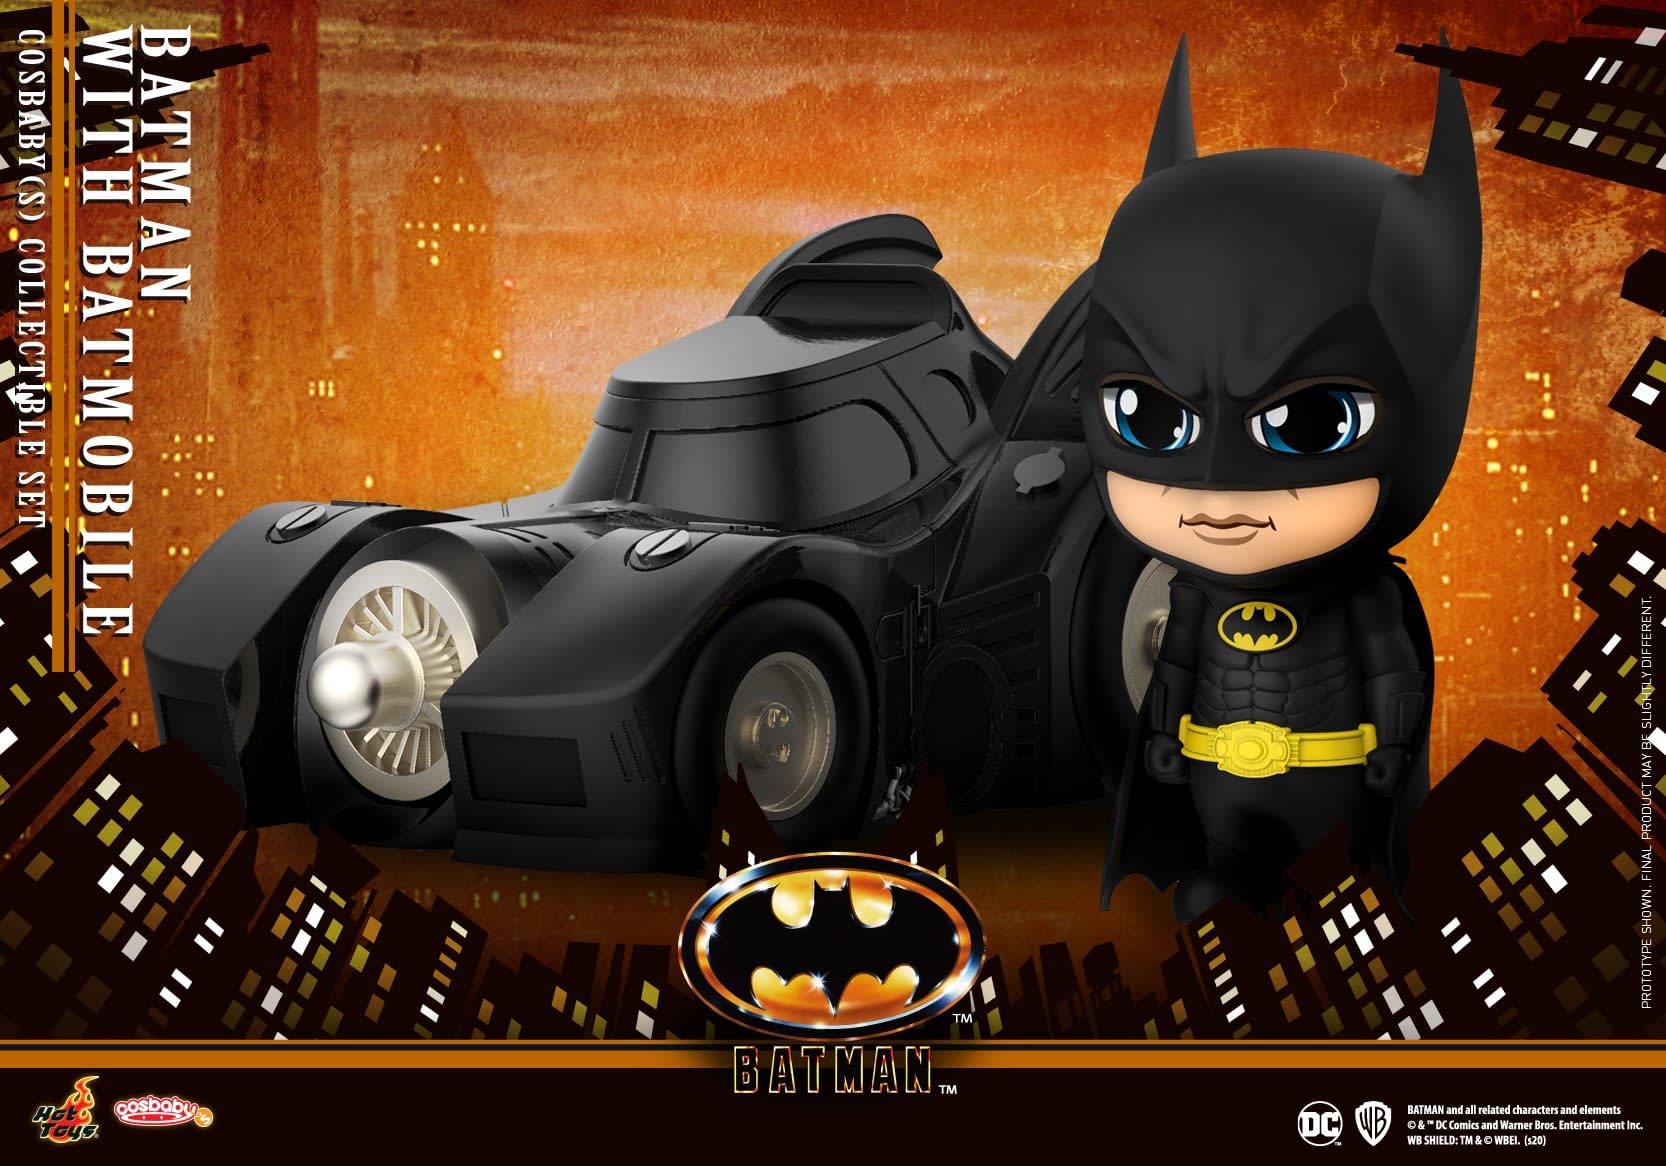 Batman 1989 Gets Adorable with New Cosbaby Figures From Hot Toys